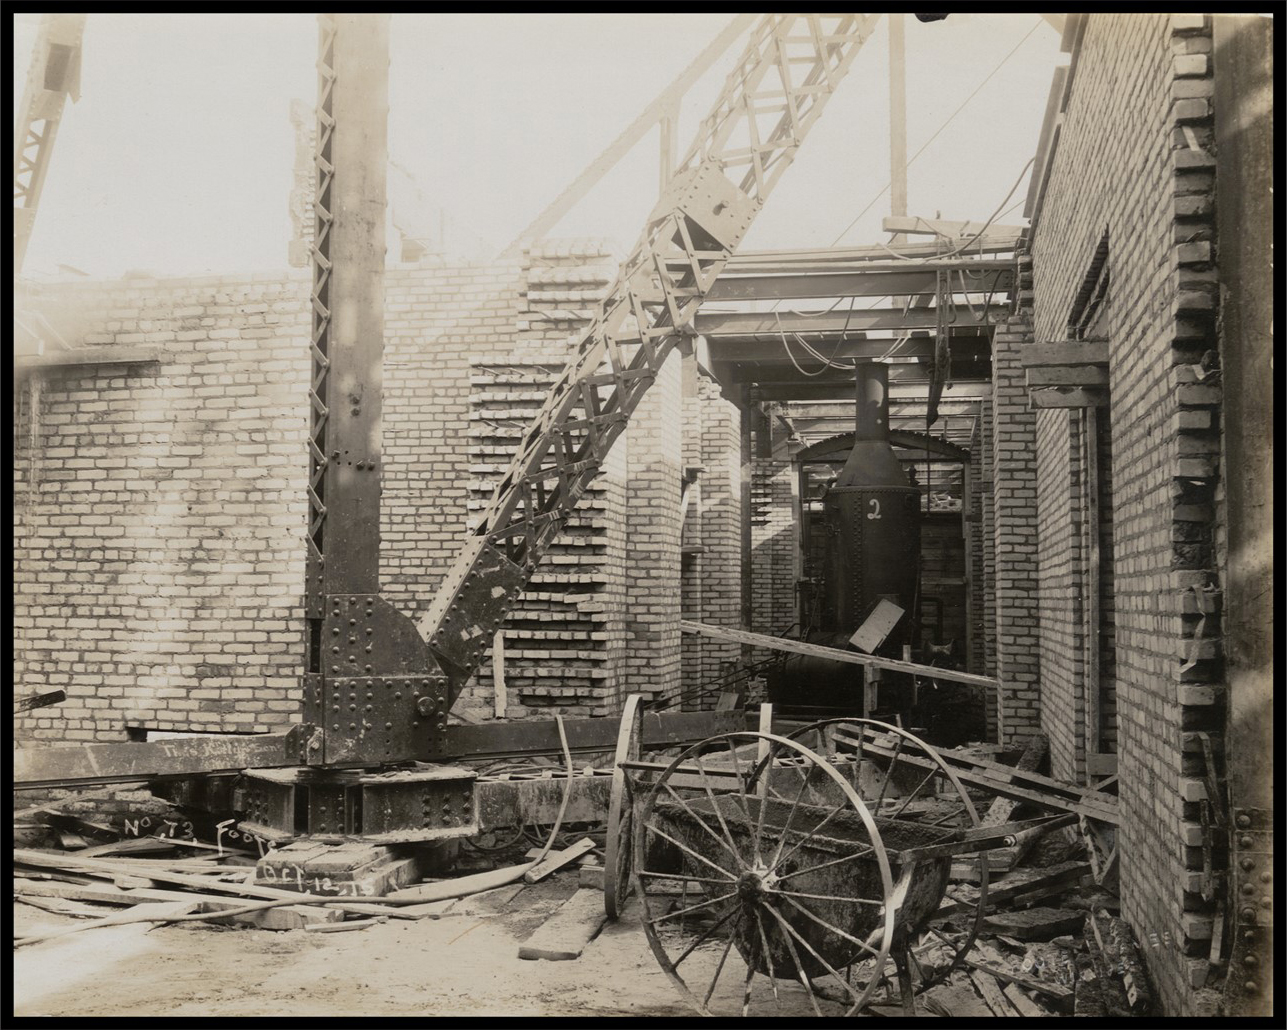 Interior portion of the building from the ground floor, with construction materials and mortar cluttering the area.